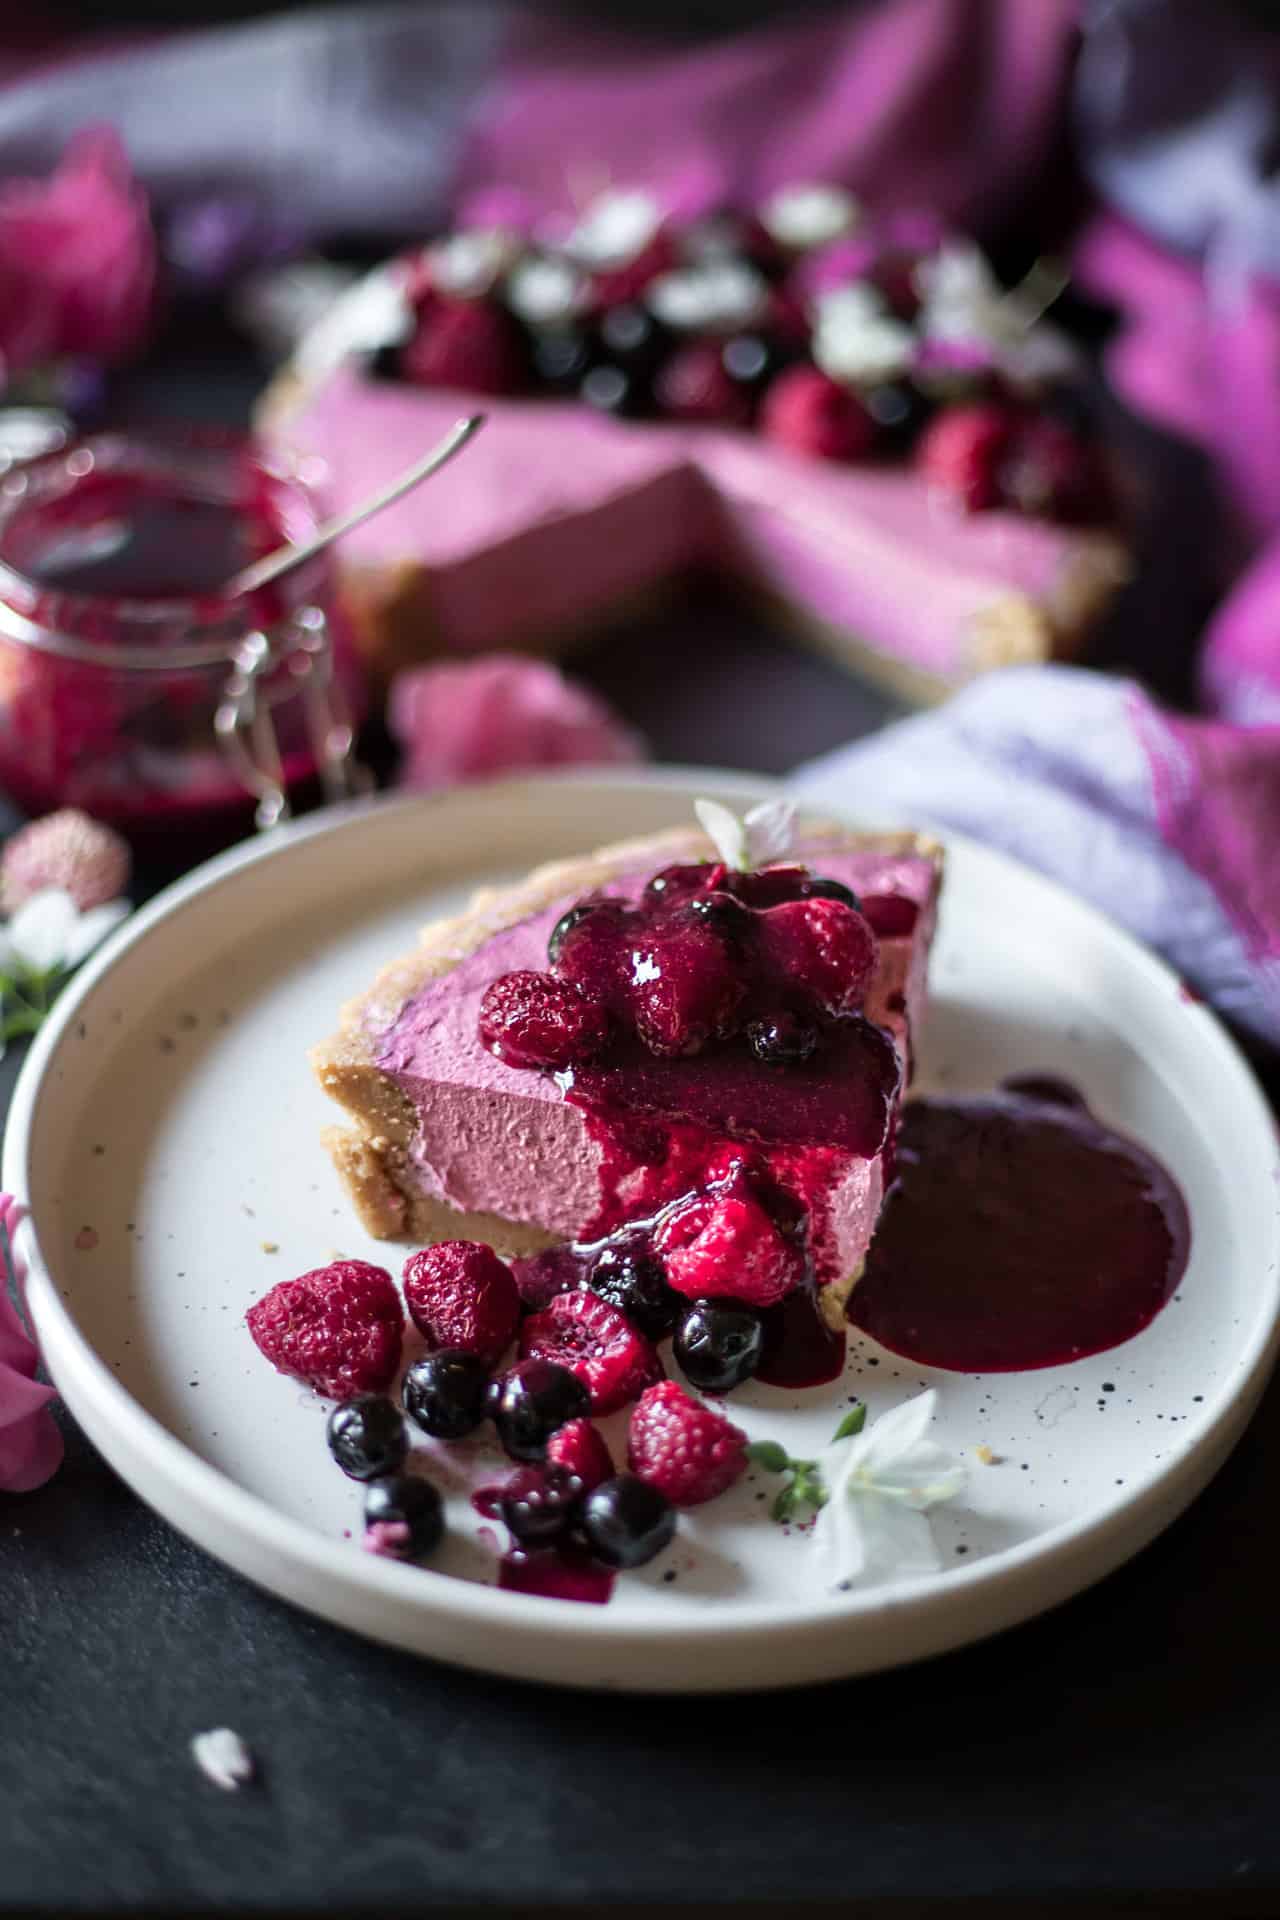 This Gluten-Free No-Bake Mixed Berry Tart is low FODMAP and lactose-free. It's flavorful, refreshing, perfectly sweetened with a super creamy texture.